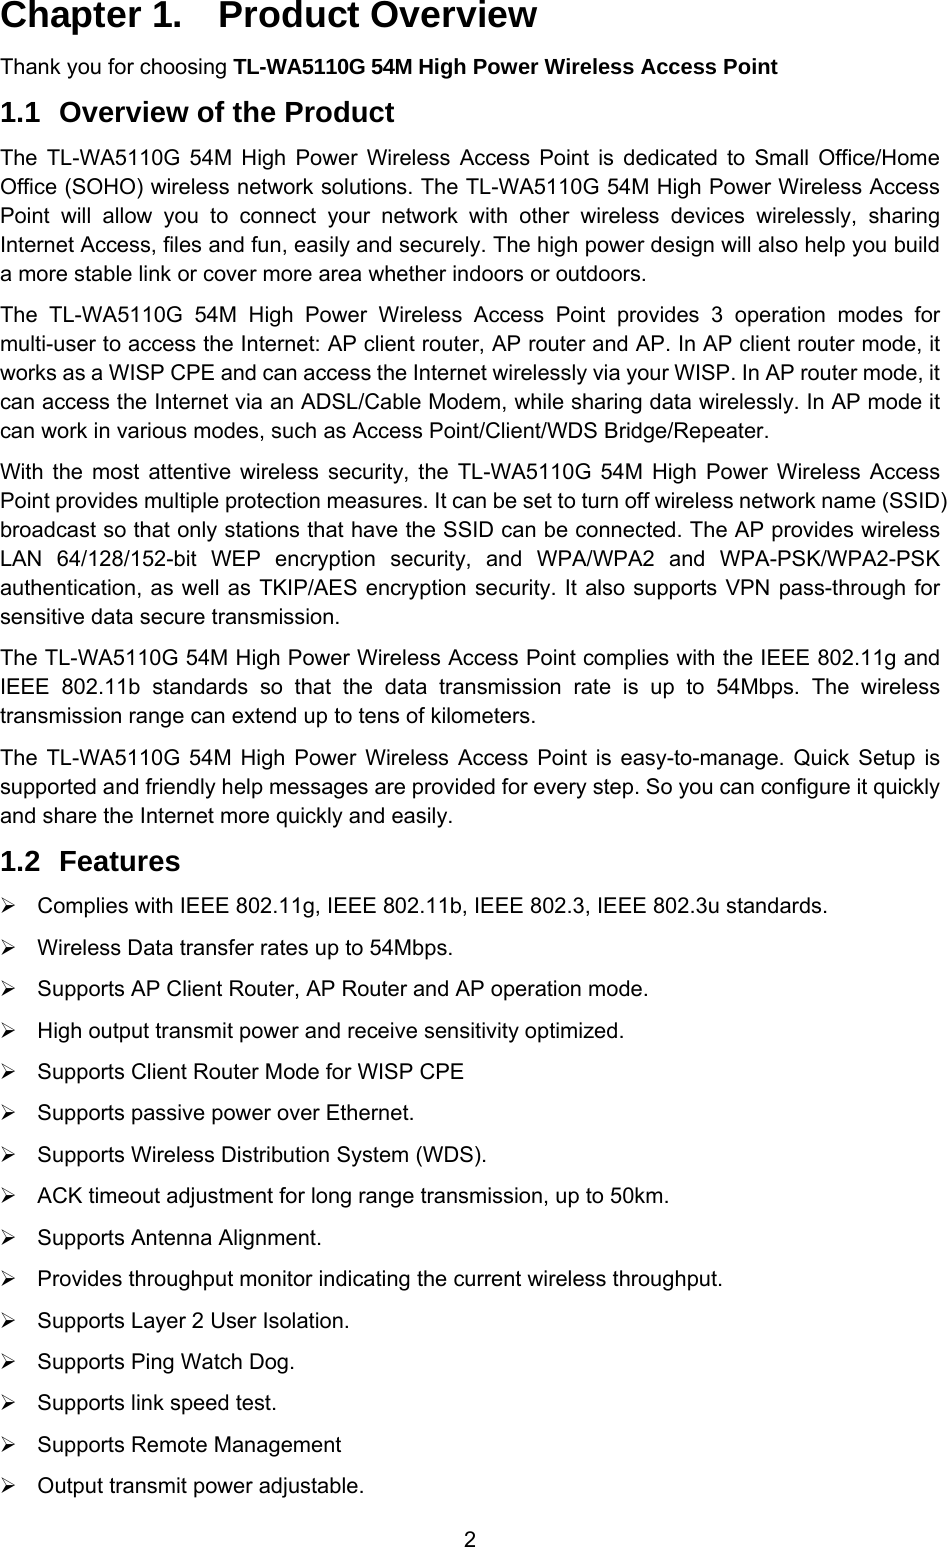  2 Chapter 1.  Product Overview Thank you for choosing TL-WA5110G 54M High Power Wireless Access Point 1.1  Overview of the Product The TL-WA5110G 54M High Power Wireless Access Point is dedicated to Small Office/Home Office (SOHO) wireless network solutions. The TL-WA5110G 54M High Power Wireless Access Point will allow you to connect your network with other wireless devices wirelessly, sharing Internet Access, files and fun, easily and securely. The high power design will also help you build a more stable link or cover more area whether indoors or outdoors. The TL-WA5110G 54M High Power Wireless Access Point provides 3 operation modes for multi-user to access the Internet: AP client router, AP router and AP. In AP client router mode, it works as a WISP CPE and can access the Internet wirelessly via your WISP. In AP router mode, it can access the Internet via an ADSL/Cable Modem, while sharing data wirelessly. In AP mode it can work in various modes, such as Access Point/Client/WDS Bridge/Repeater. With the most attentive wireless security, the TL-WA5110G 54M High Power Wireless Access Point provides multiple protection measures. It can be set to turn off wireless network name (SSID) broadcast so that only stations that have the SSID can be connected. The AP provides wireless LAN 64/128/152-bit WEP encryption security, and WPA/WPA2 and WPA-PSK/WPA2-PSK authentication, as well as TKIP/AES encryption security. It also supports VPN pass-through for sensitive data secure transmission. The TL-WA5110G 54M High Power Wireless Access Point complies with the IEEE 802.11g and IEEE 802.11b standards so that the data transmission rate is up to 54Mbps. The wireless transmission range can extend up to tens of kilometers. The TL-WA5110G 54M High Power Wireless Access Point is easy-to-manage. Quick Setup is supported and friendly help messages are provided for every step. So you can configure it quickly and share the Internet more quickly and easily. 1.2  Features ¾  Complies with IEEE 802.11g, IEEE 802.11b, IEEE 802.3, IEEE 802.3u standards. ¾  Wireless Data transfer rates up to 54Mbps. ¾  Supports AP Client Router, AP Router and AP operation mode. ¾  High output transmit power and receive sensitivity optimized. ¾  Supports Client Router Mode for WISP CPE ¾  Supports passive power over Ethernet. ¾  Supports Wireless Distribution System (WDS). ¾  ACK timeout adjustment for long range transmission, up to 50km. ¾  Supports Antenna Alignment. ¾  Provides throughput monitor indicating the current wireless throughput. ¾  Supports Layer 2 User Isolation. ¾  Supports Ping Watch Dog. ¾  Supports link speed test. ¾  Supports Remote Management   ¾  Output transmit power adjustable. 